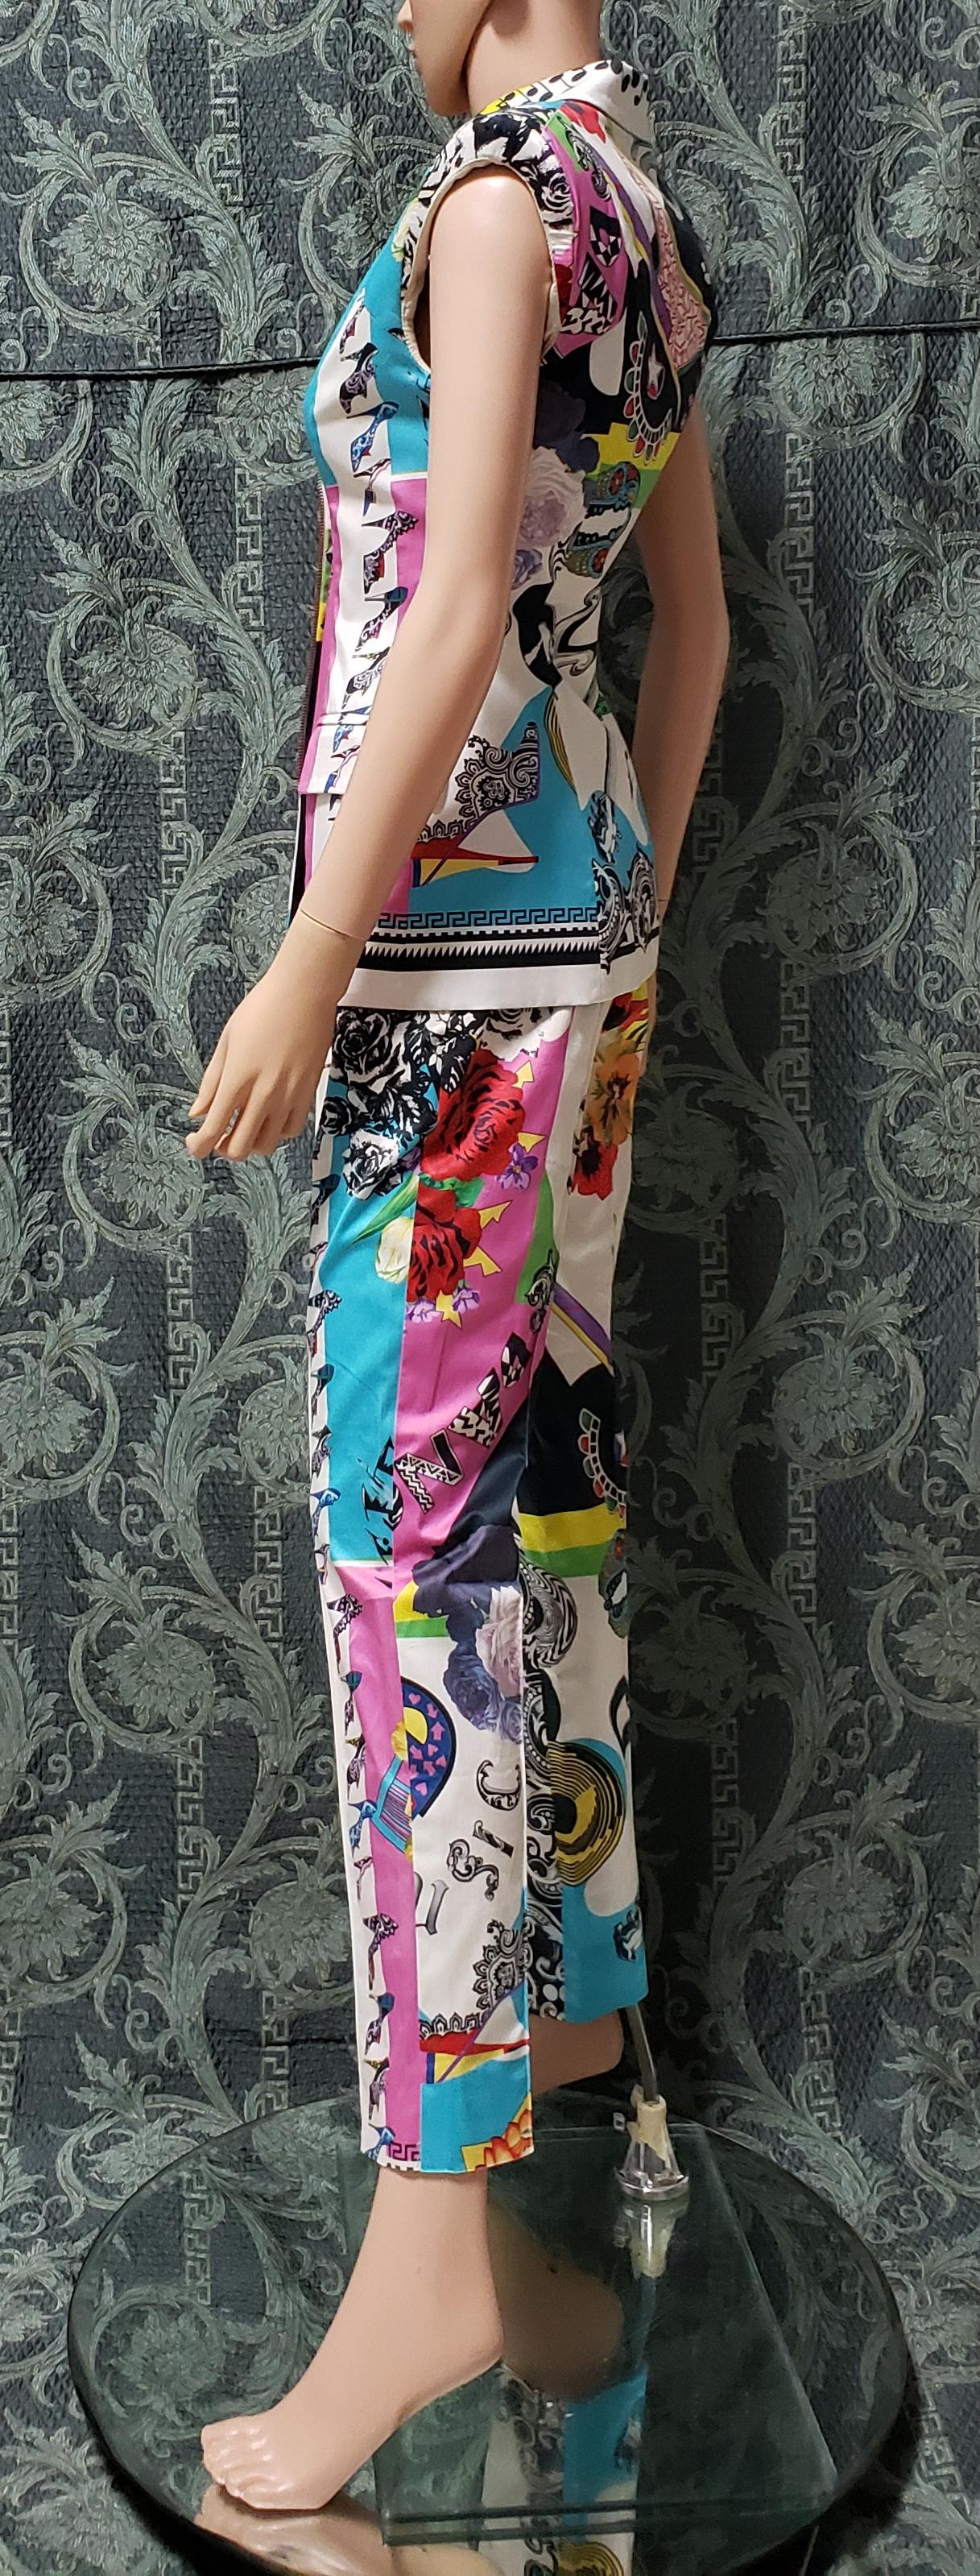 Resort 2013 Look # 4 NEW VERSACE ICONIC PRINT PANT SUIT 38 - 2  For Sale 2